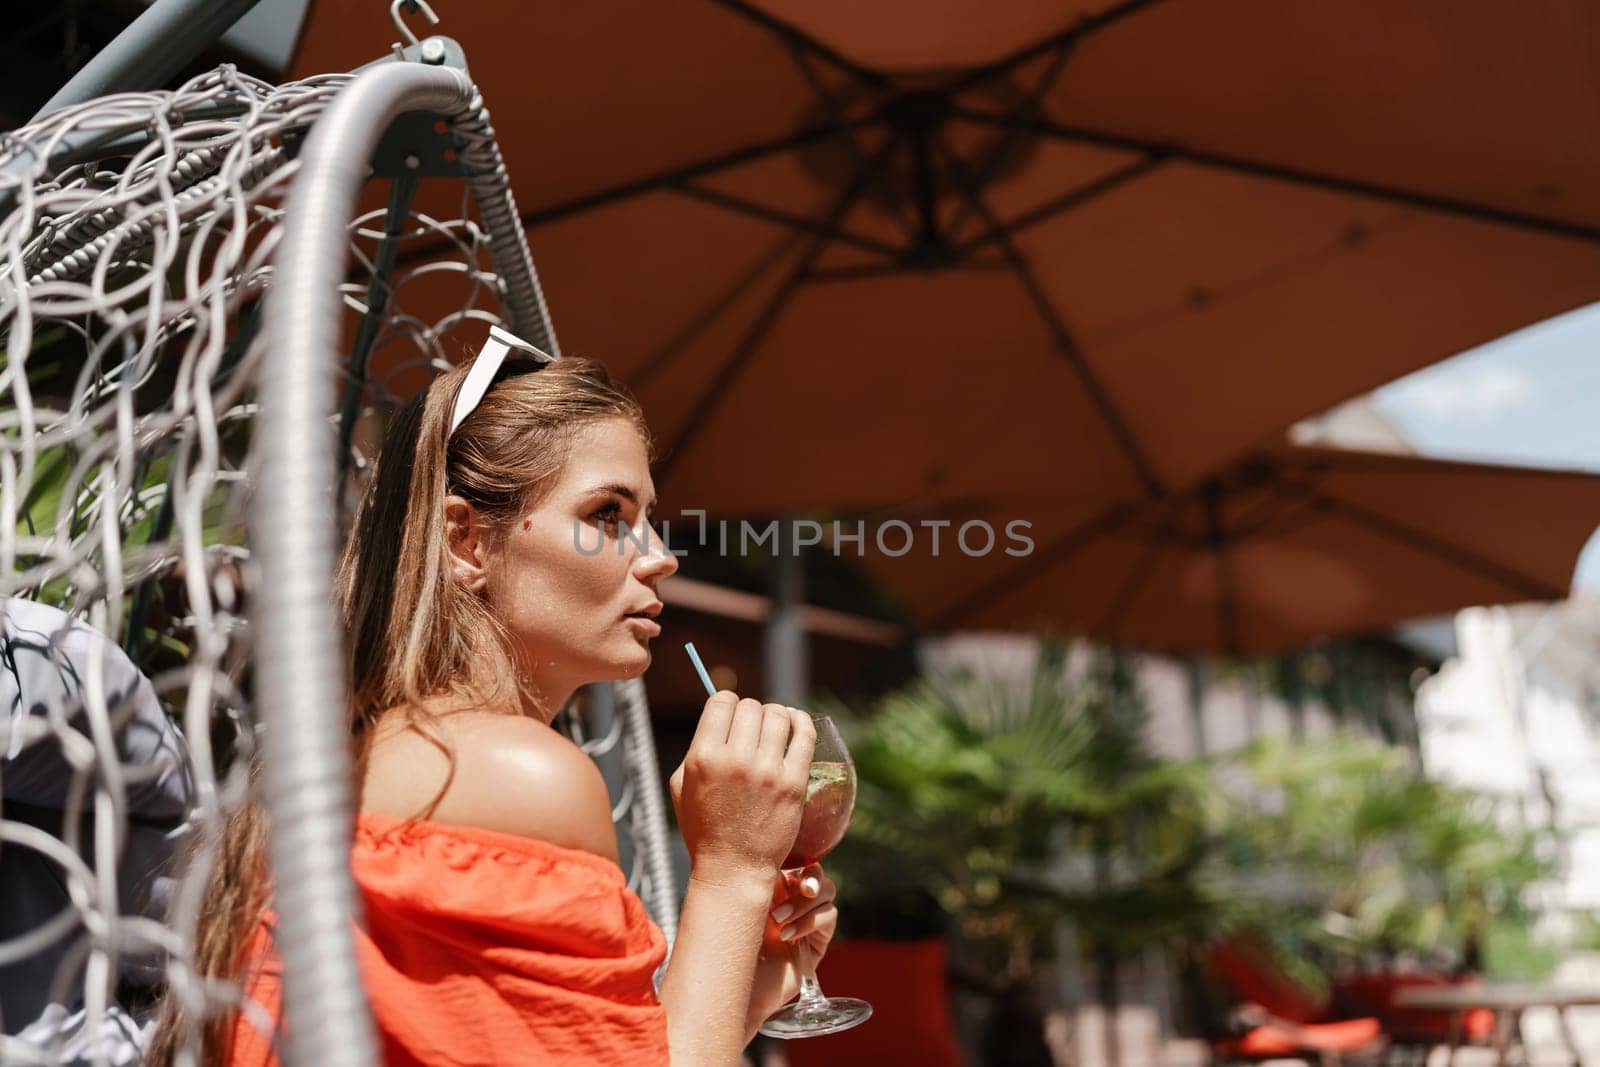 A woman in an orange dress is sitting in a chair with a drink in front of her. She is looking at the camera and she is enjoying her drink. The scene is set in a patio or outdoor area. by Matiunina